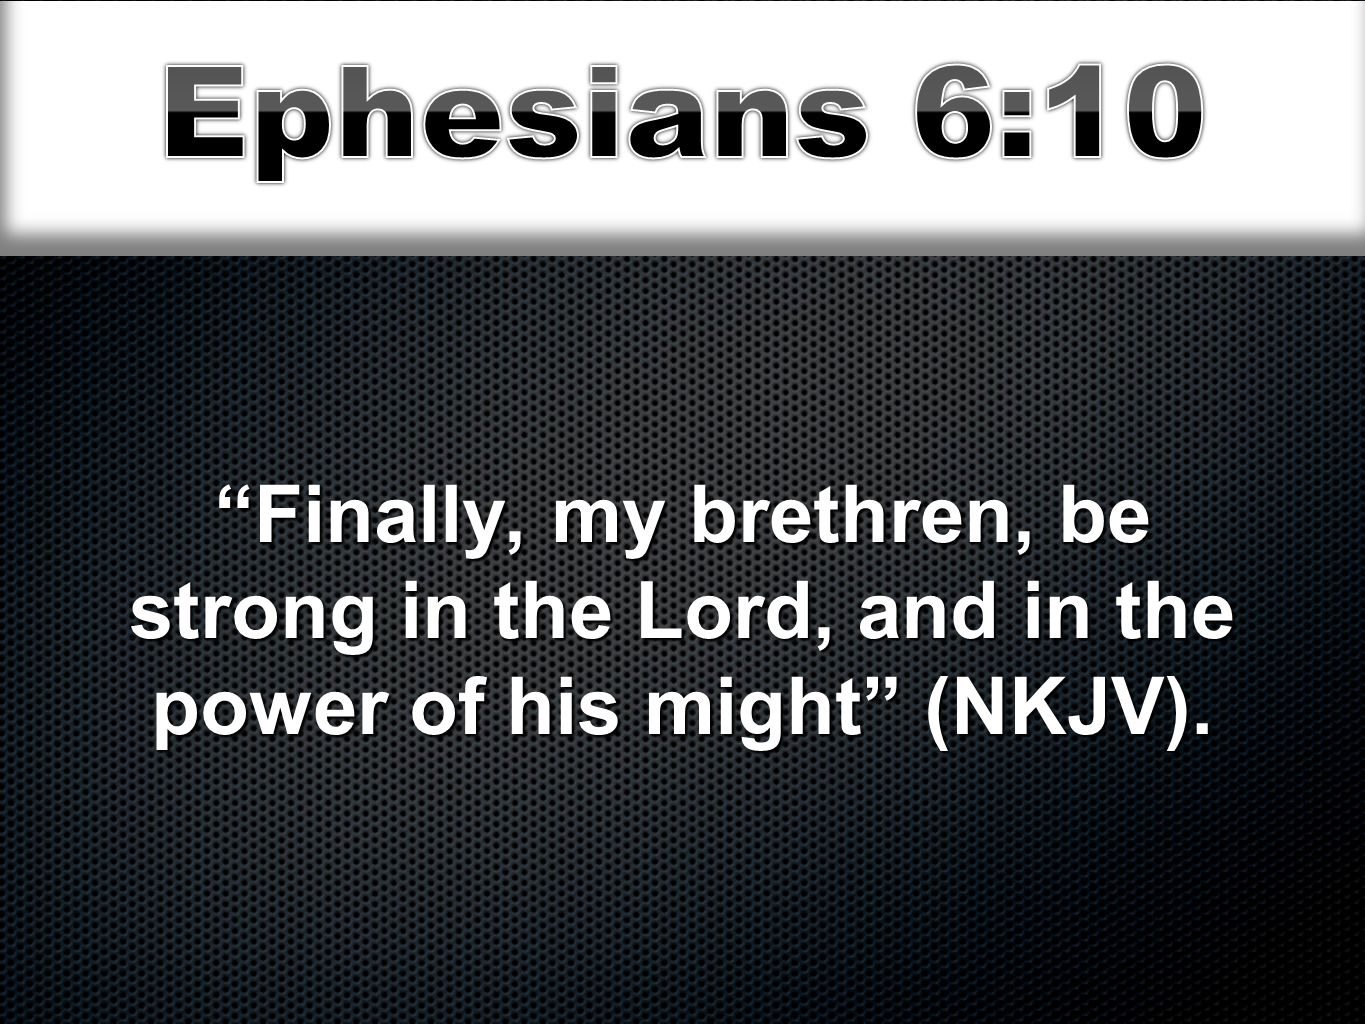 Finally, my brethren, be strong in the Lord, and in the power of his might (NKJV).